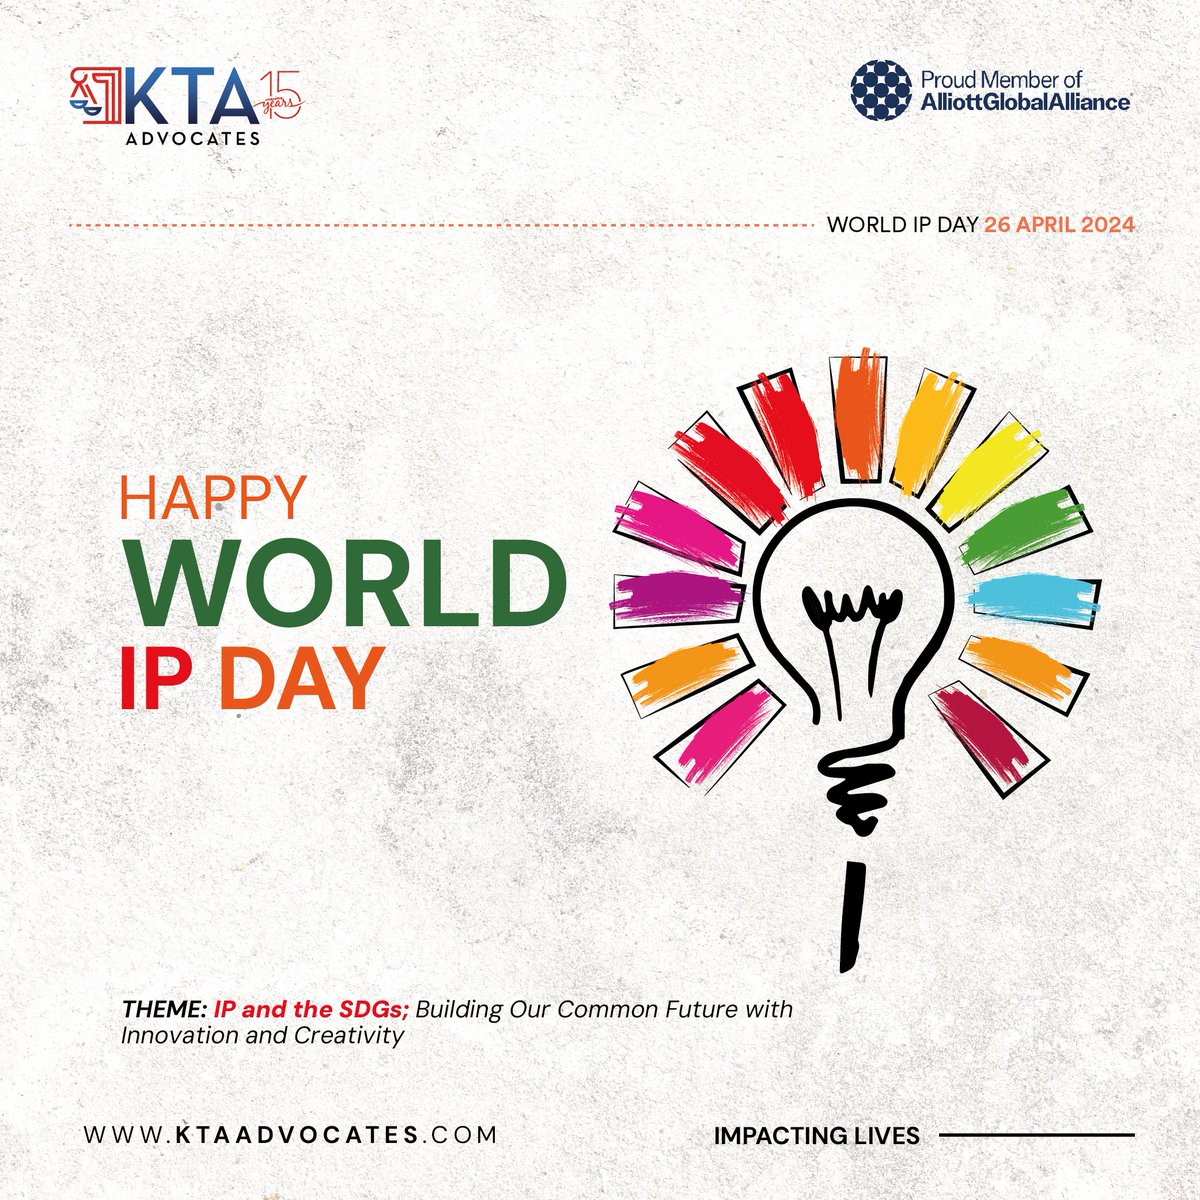 As we celebrate this year's #WorldIPDay, let's join hands with the rest of the world to foster ways to use intellectual property to build a sustainable world through #creativity and #Innovation.

#KTAat15 #ImpactingLives